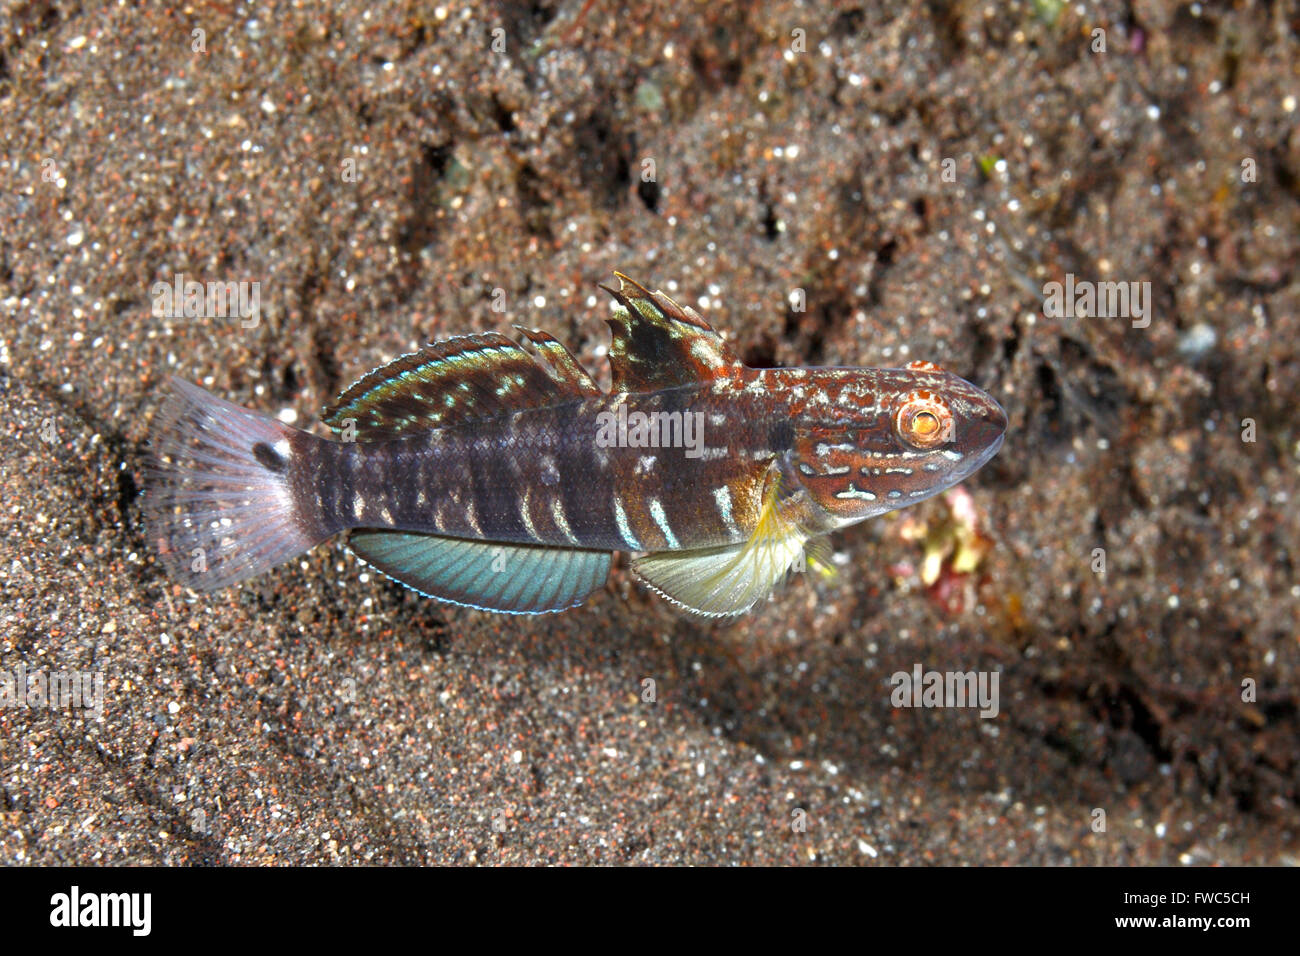 Banded Goby, Amblygobius phalaena. Also known as White-barred Goby. Tulamben, Bali, Indonesia. Bali Sea, Indian Ocean Stock Photo